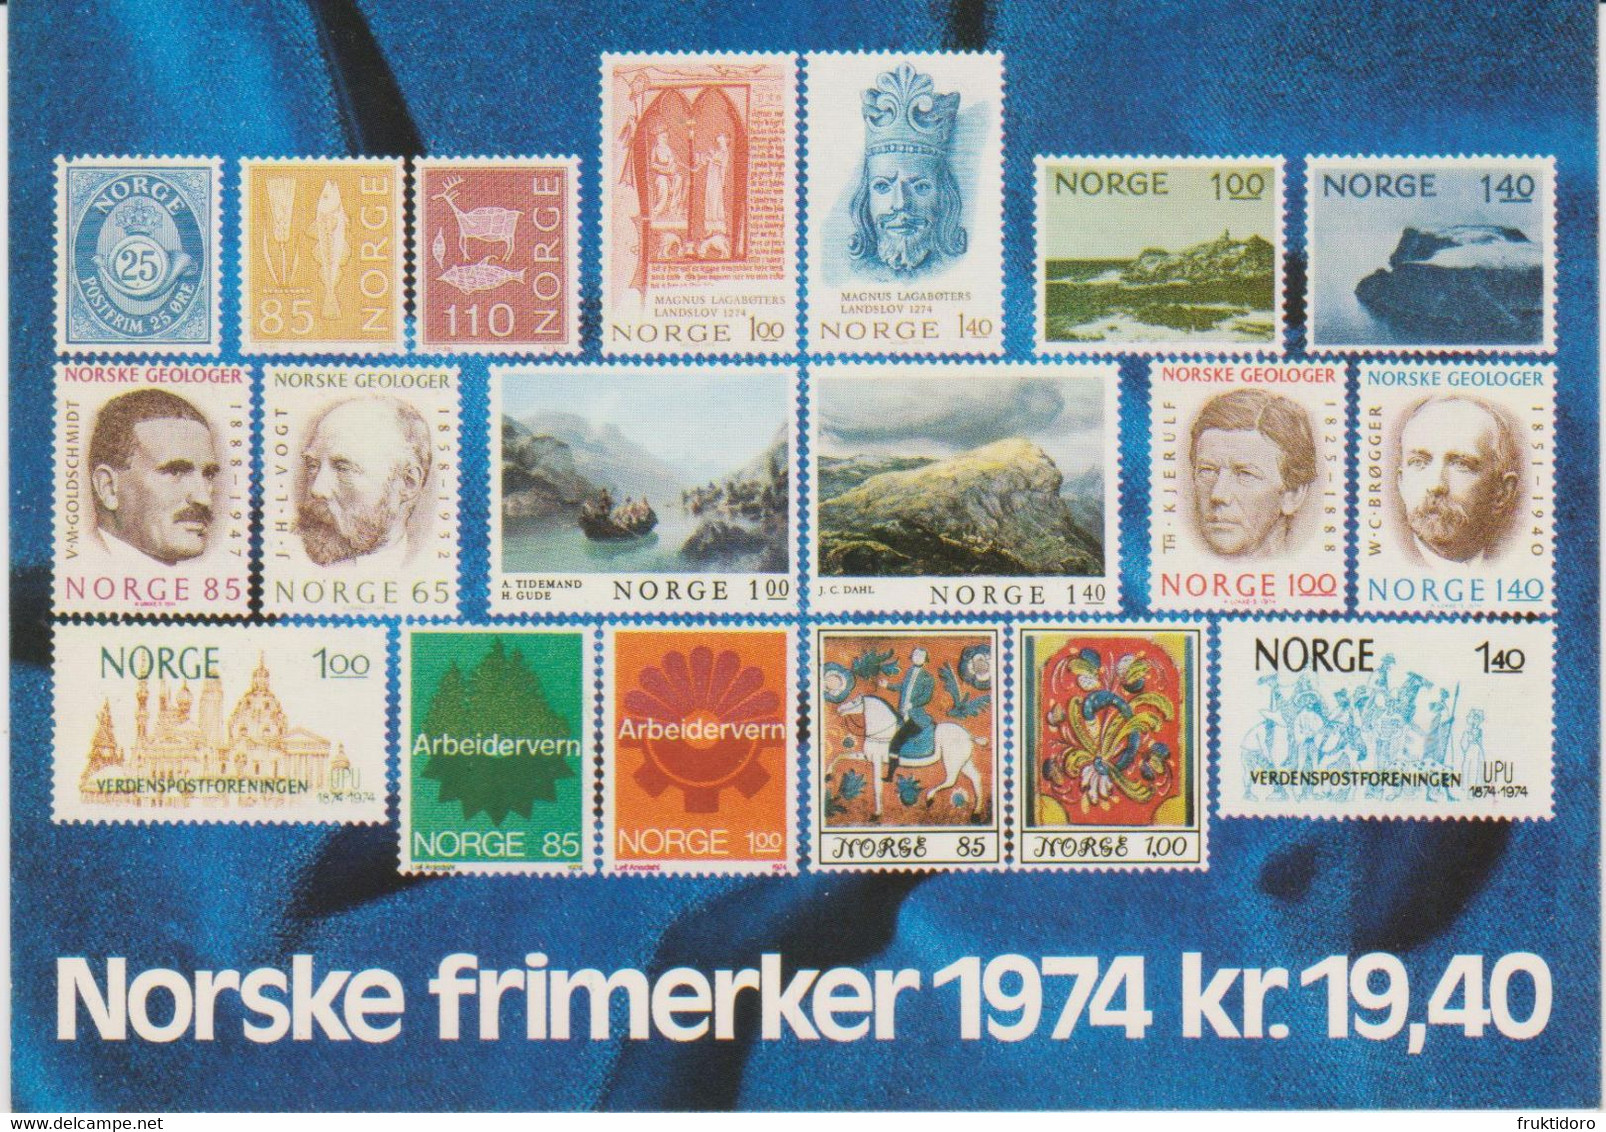 Norway Year Set Norwegian Stamps 1974 - Posthorn - North Cape - Magnus Lagabøte's State Law - Industrial Safety ** - Années Complètes